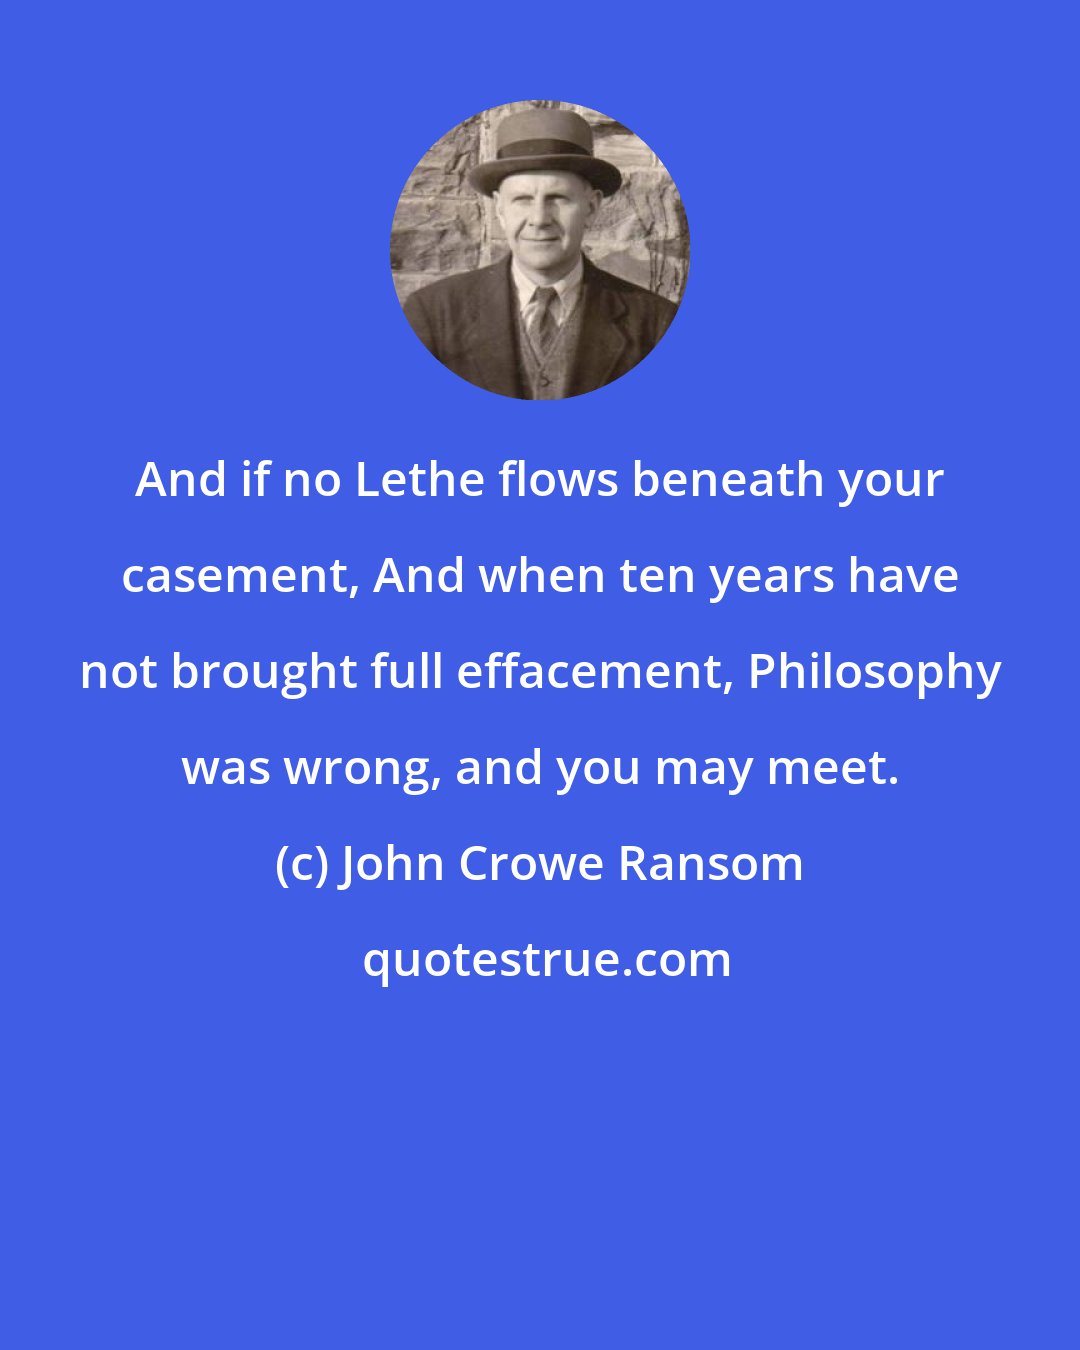 John Crowe Ransom: And if no Lethe flows beneath your casement, And when ten years have not brought full effacement, Philosophy was wrong, and you may meet.